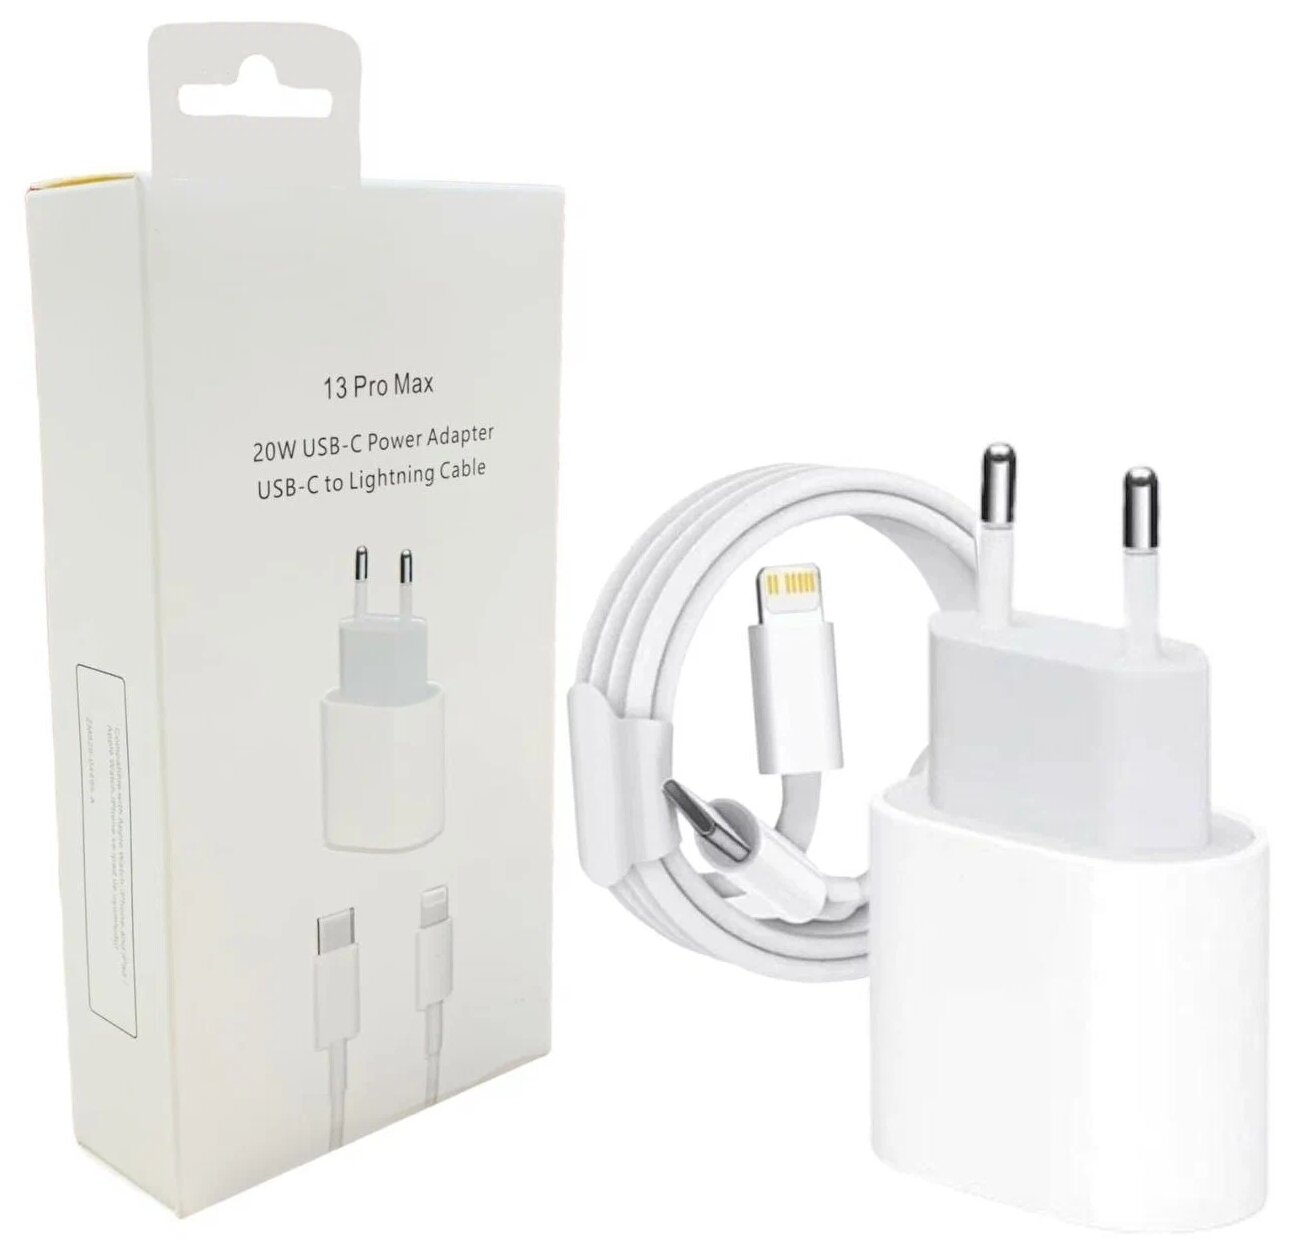 13 Pro Max 20W USB-C Power Adapter USB-C to Lightning Cable